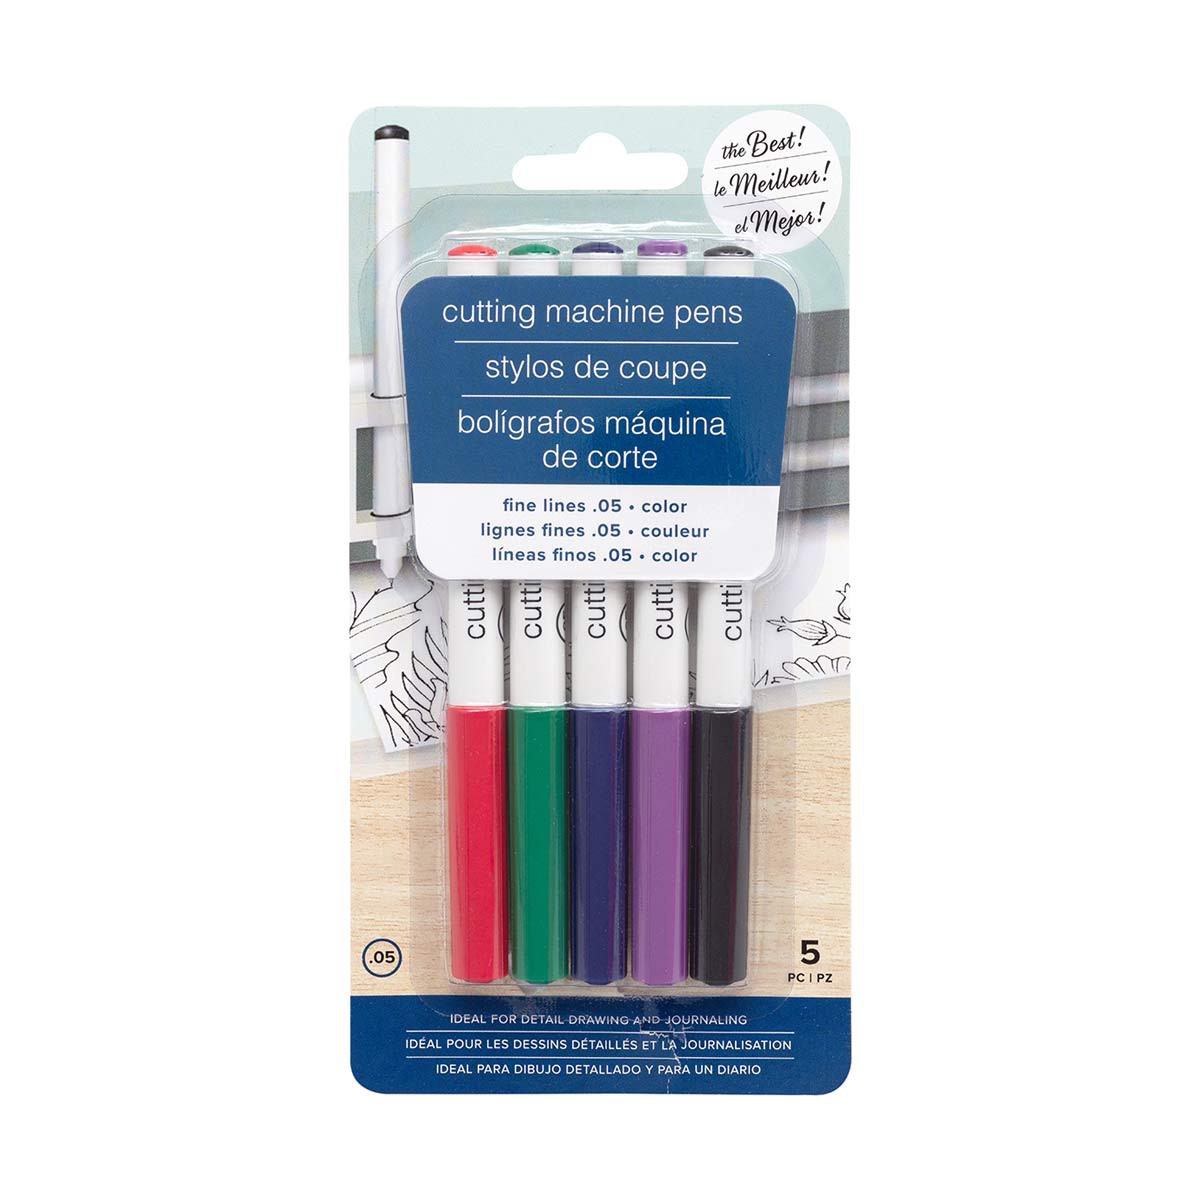 American Crafts Cutting Machine Pens, Fine Lines .05 Color, Pack of 5